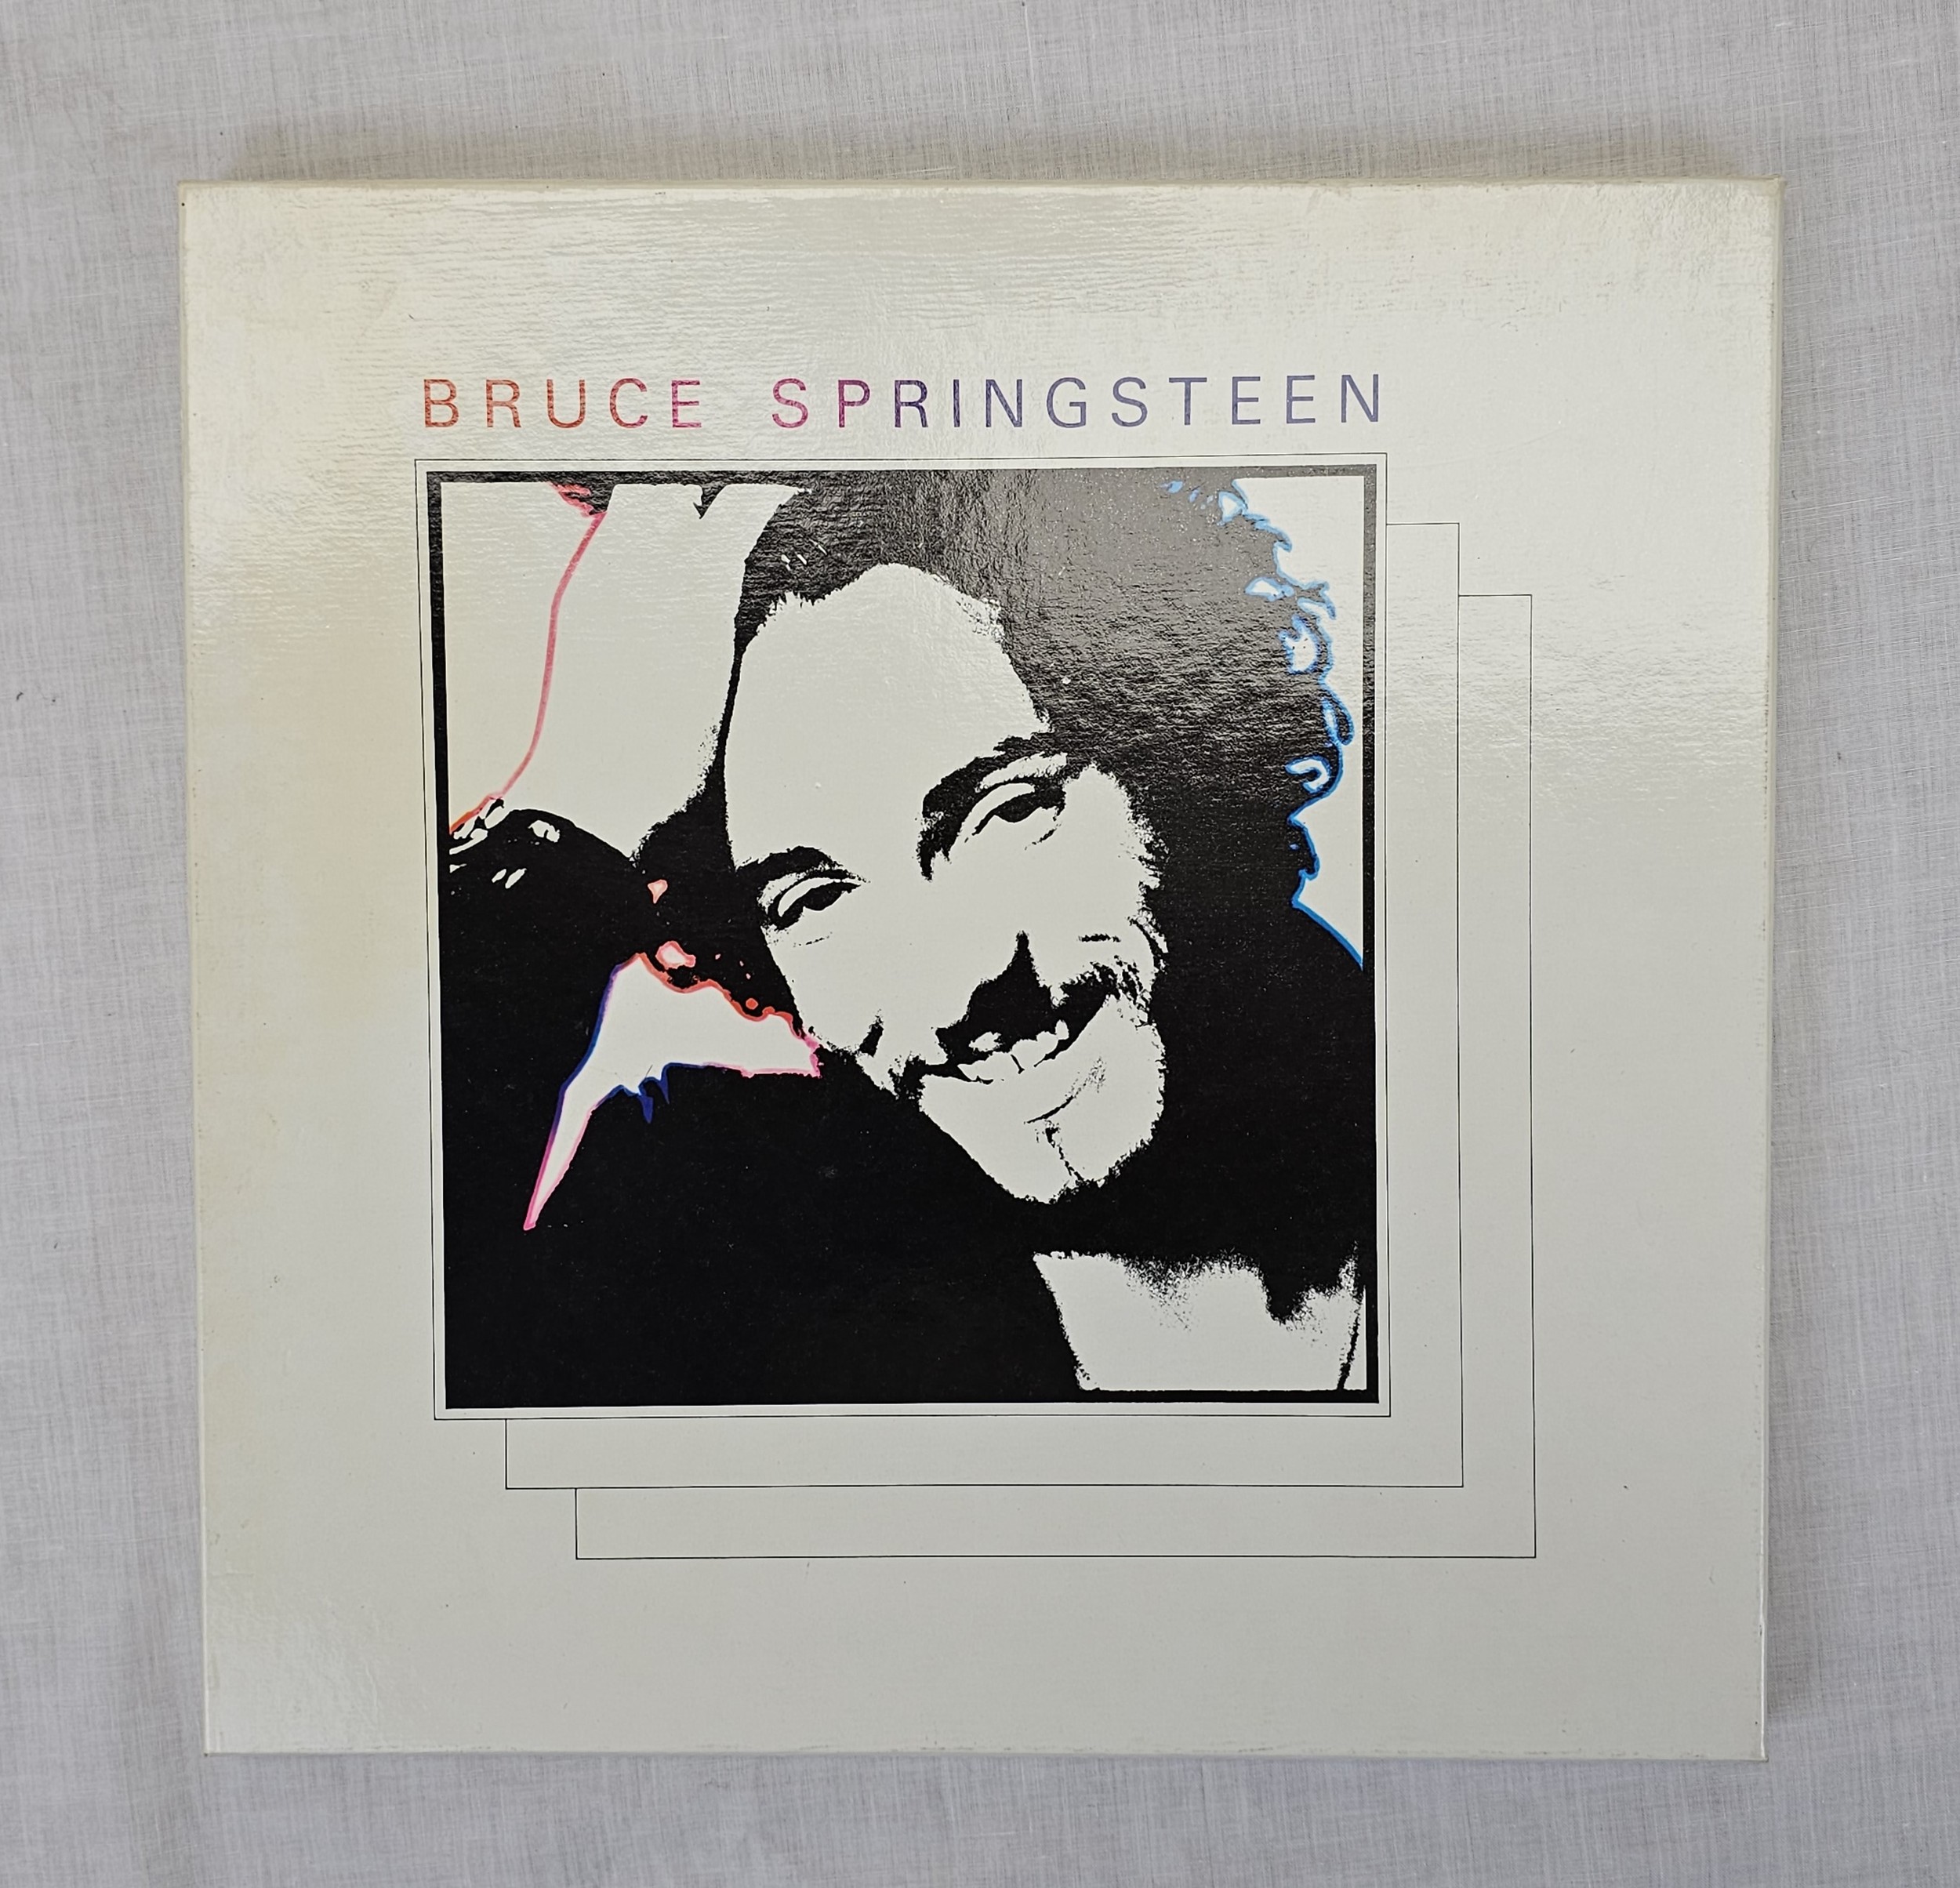 Records - Springsteen LP Box Set in VG condition. - Image 2 of 6